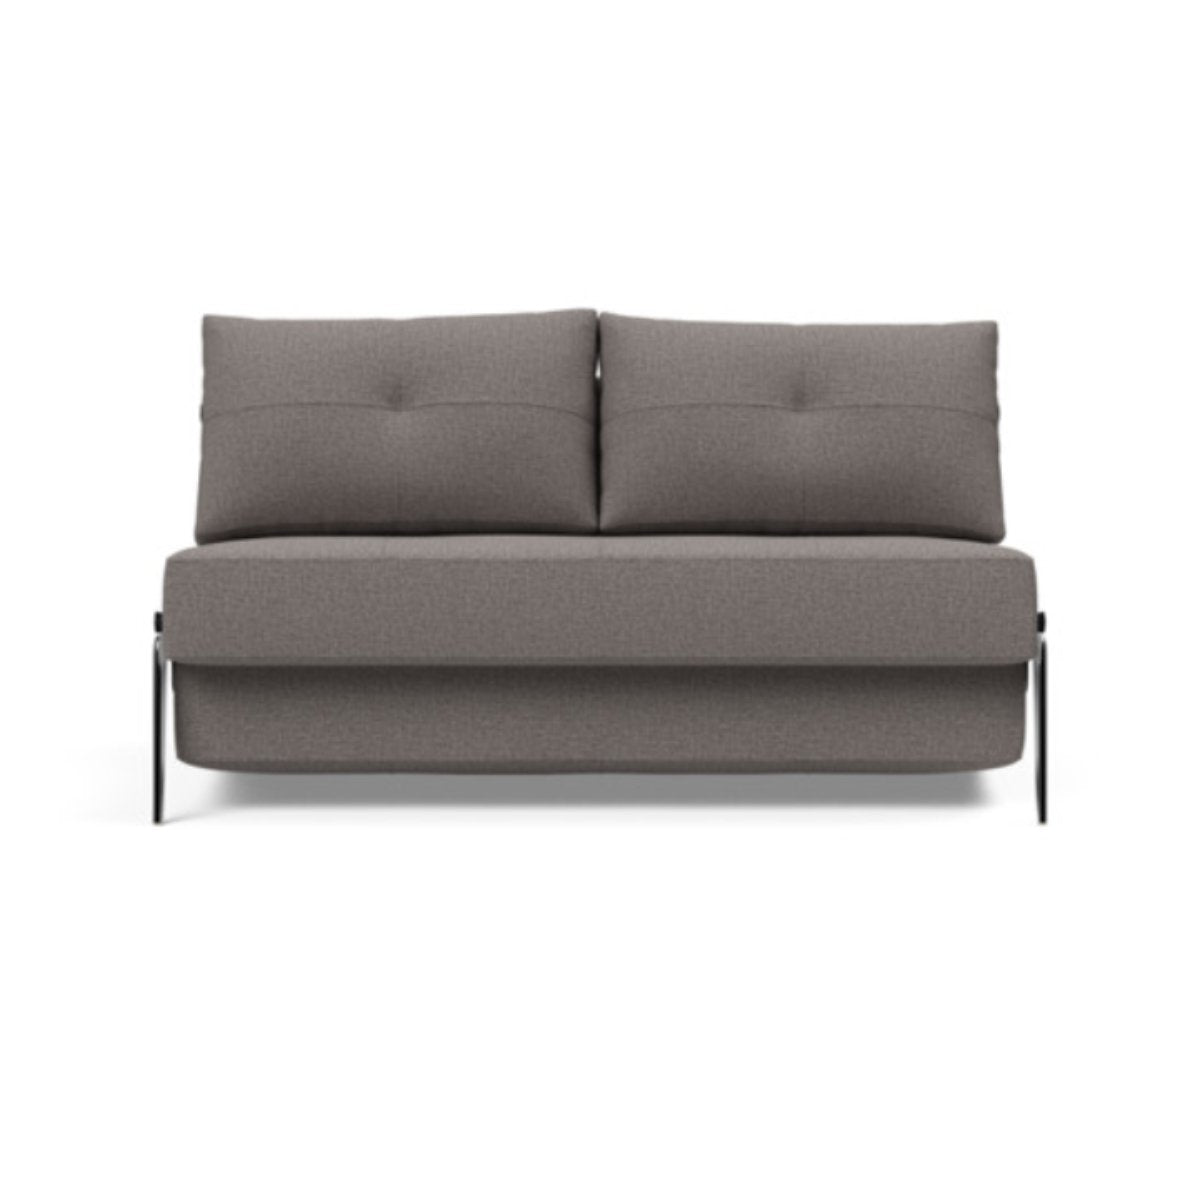 Cubed Full Size Sofa Bed With Alu Legs 521 Mixed Dance GreySofa Beds INNOVATION  521 Mixed Dance Grey   Four Hands, Burke Decor, Mid Century Modern Furniture, Old Bones Furniture Company, Old Bones Co, Modern Mid Century, Designer Furniture, https://www.oldbonesco.com/